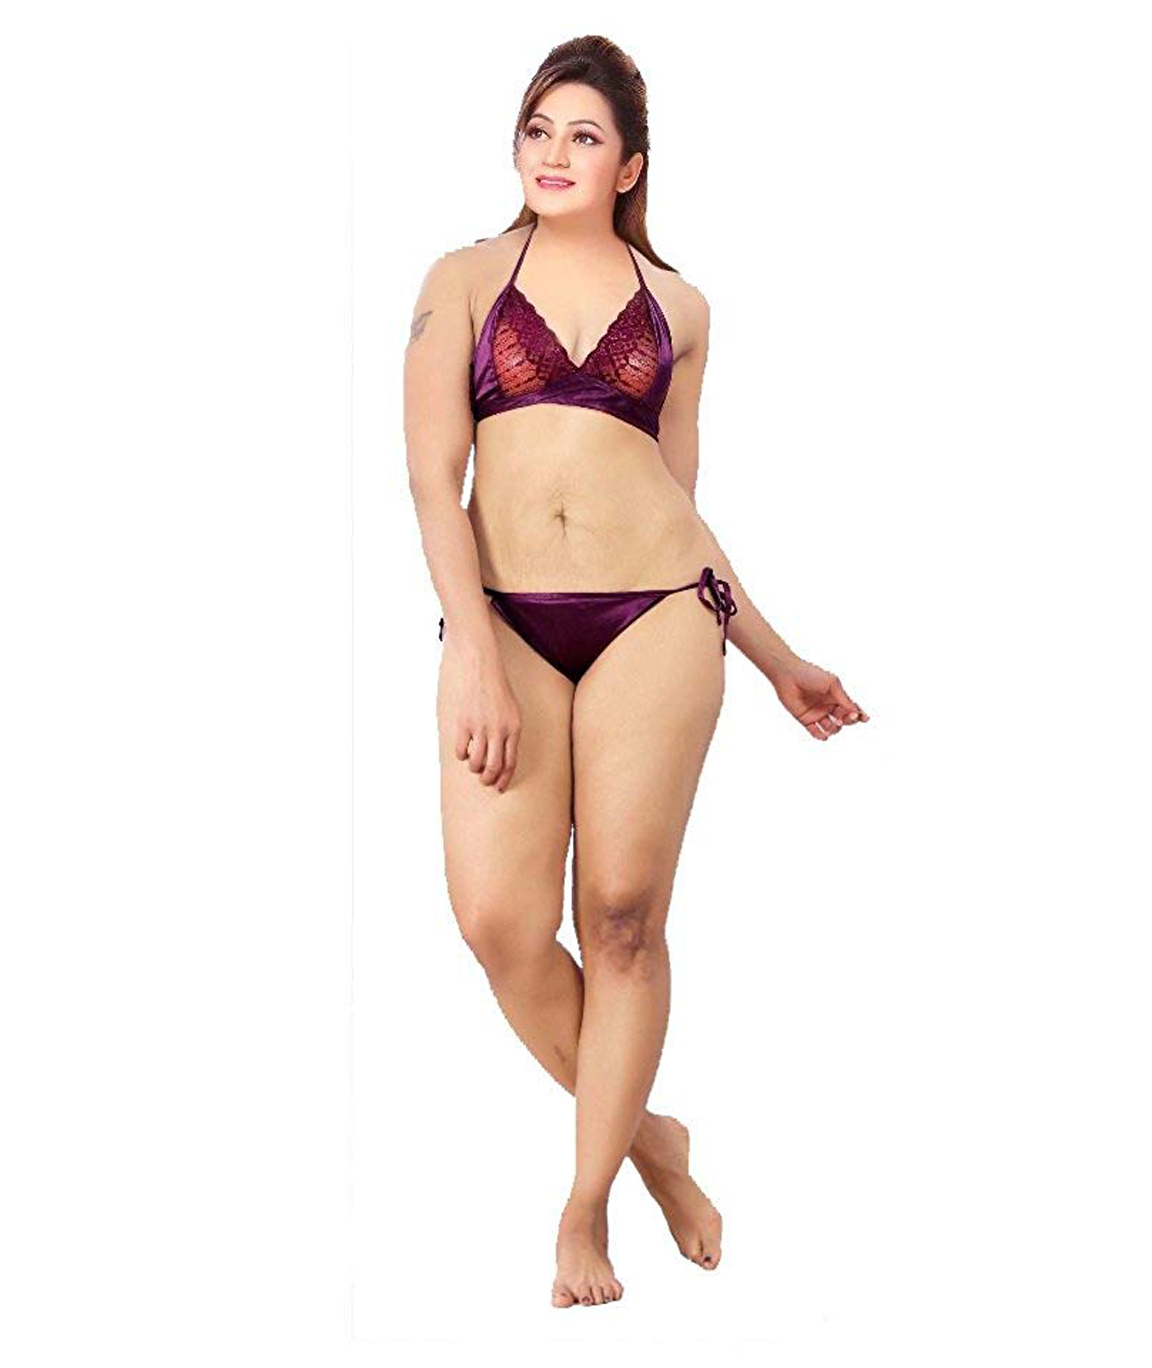 https://www.manthanonline.in/uploadImages/productimage/romaisa-women-s-satin-nighty-wrap-gown-top-pajama-bra-and-thong-free-size-pack-of-6-colour-wine-z4.jpg